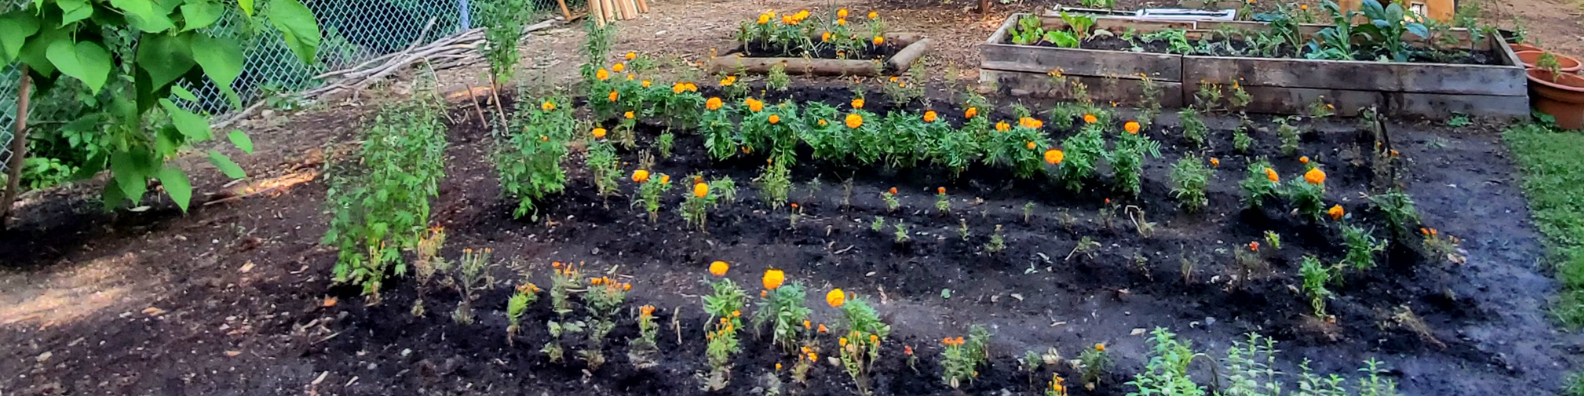 215 marigolds planted in rows in the Ajashki garden. There are raised beds of leafy greens in the background.